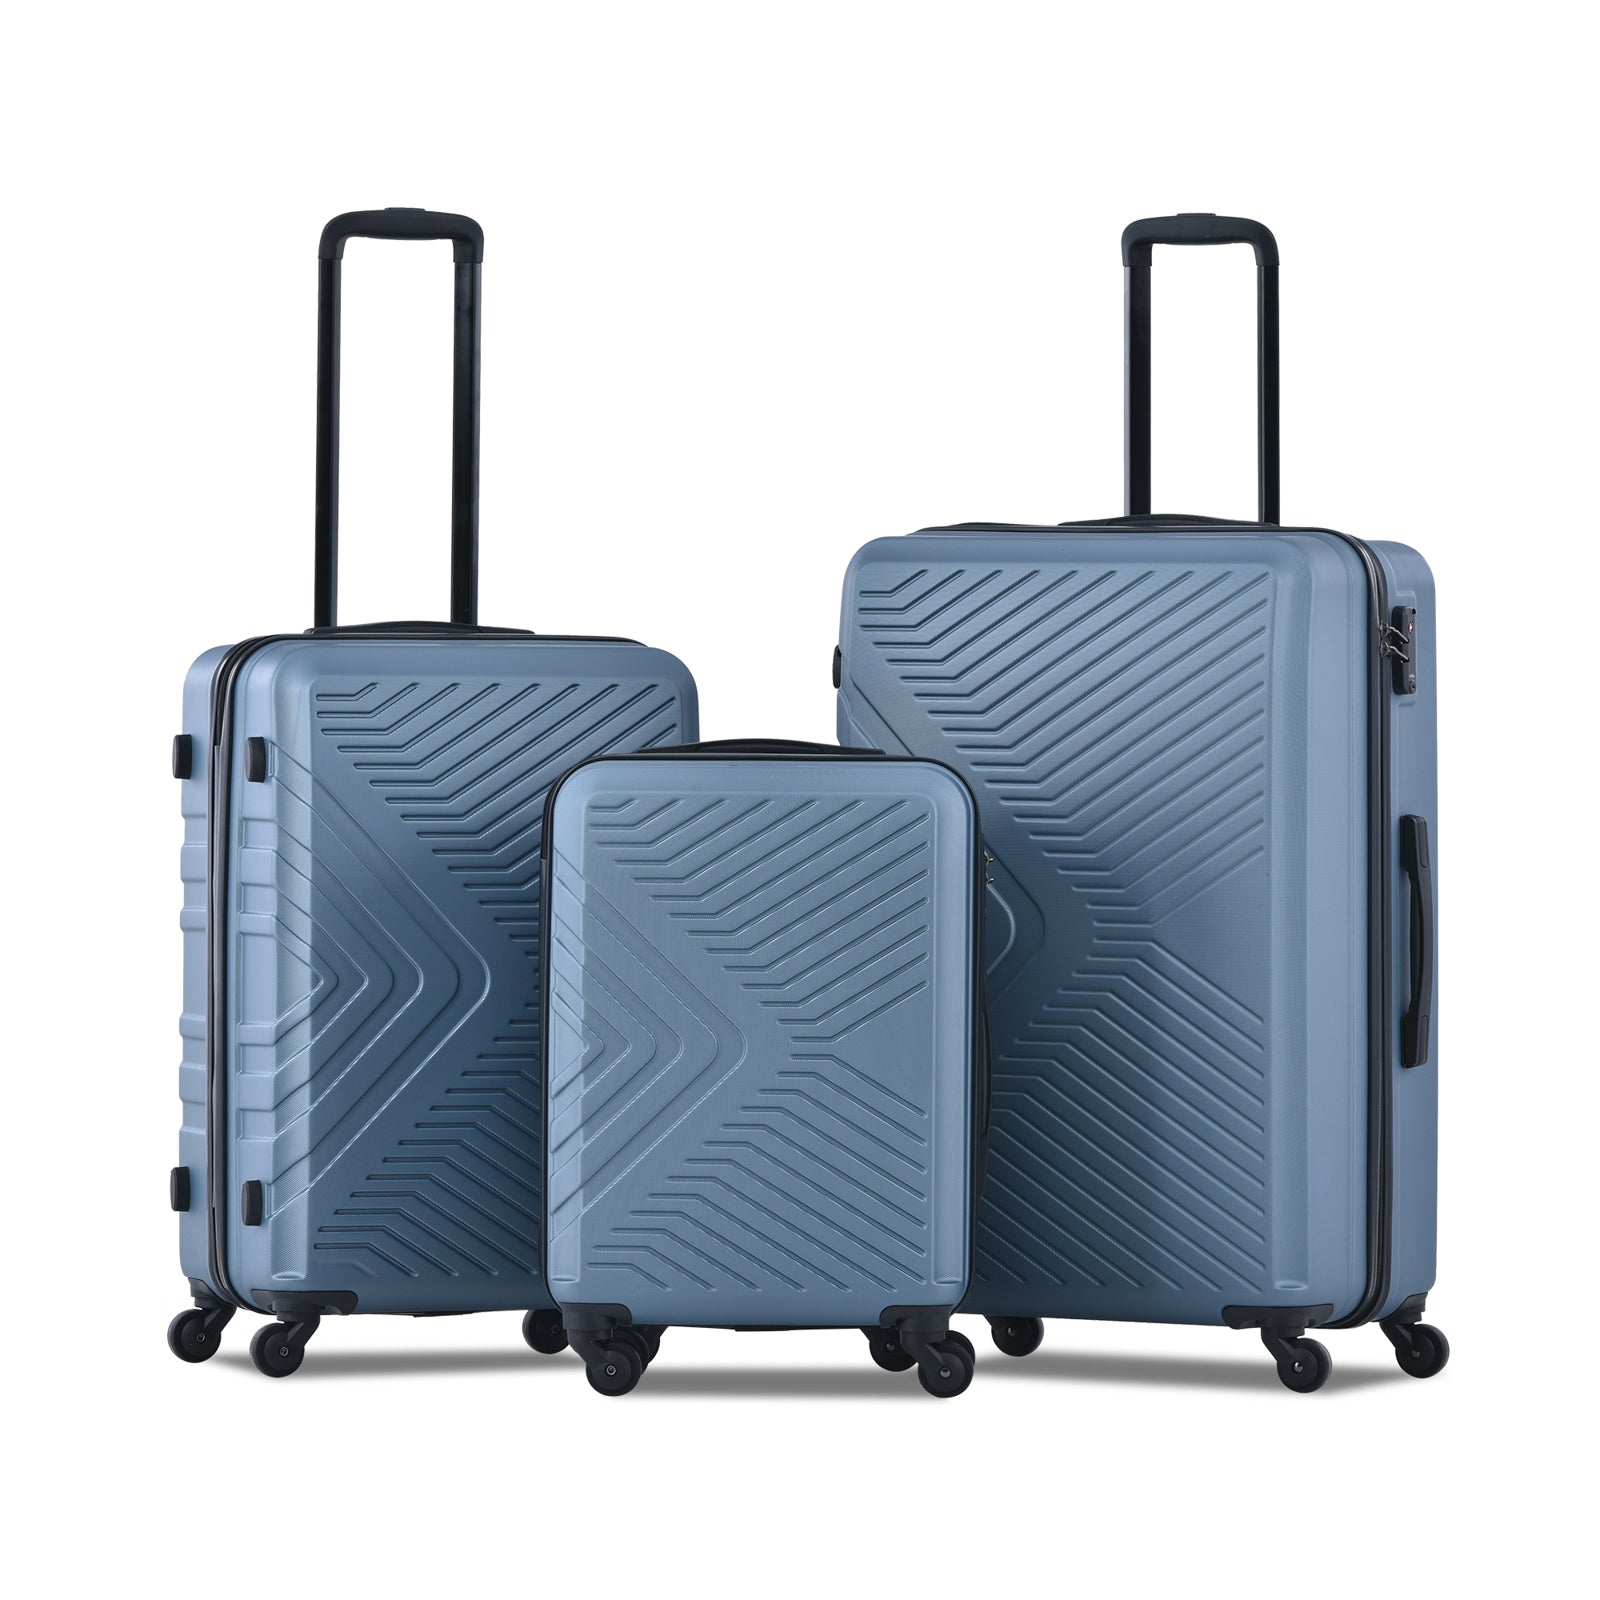 3 Piece Luggage Sets ABS Lightweight Suitcase with Two Hooks, Spinner Wheels, TSA Lock, (20/24/28) Blue